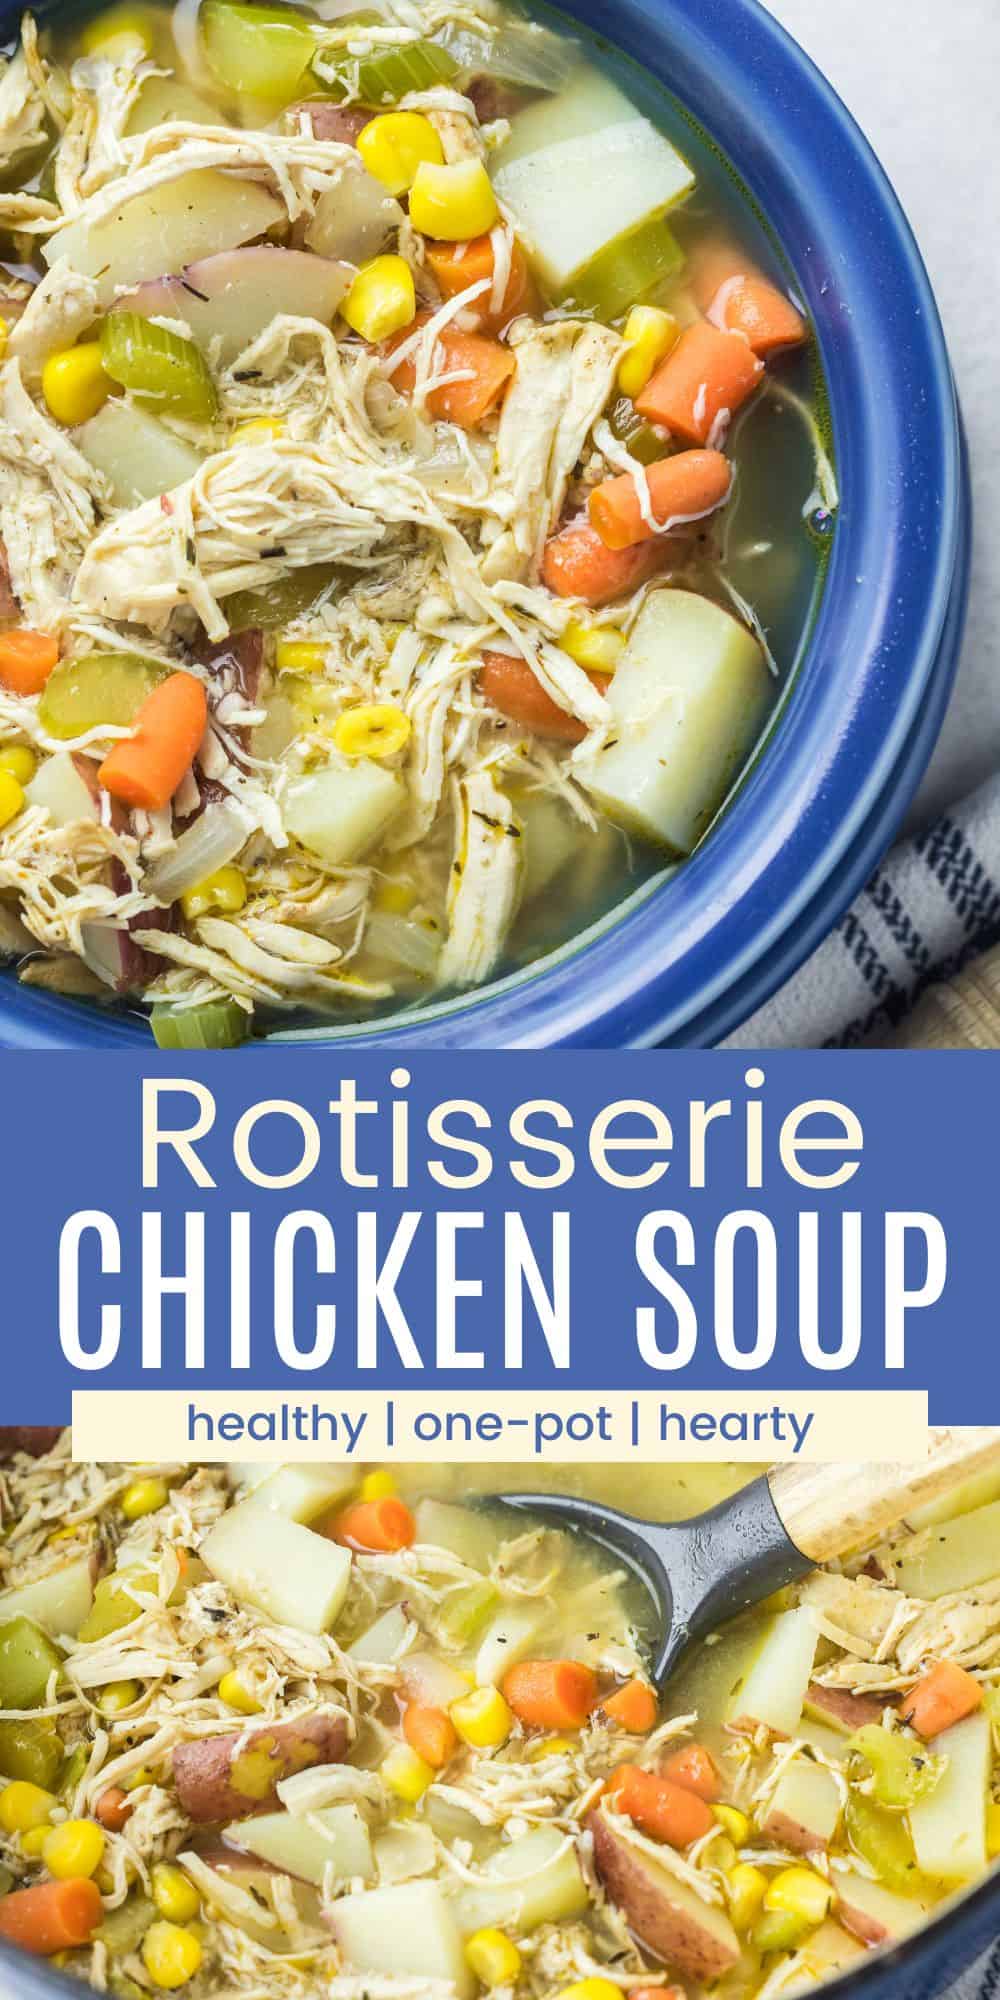 Healthy Rotisserie Chicken Soup | Cupcakes & Kale Chips